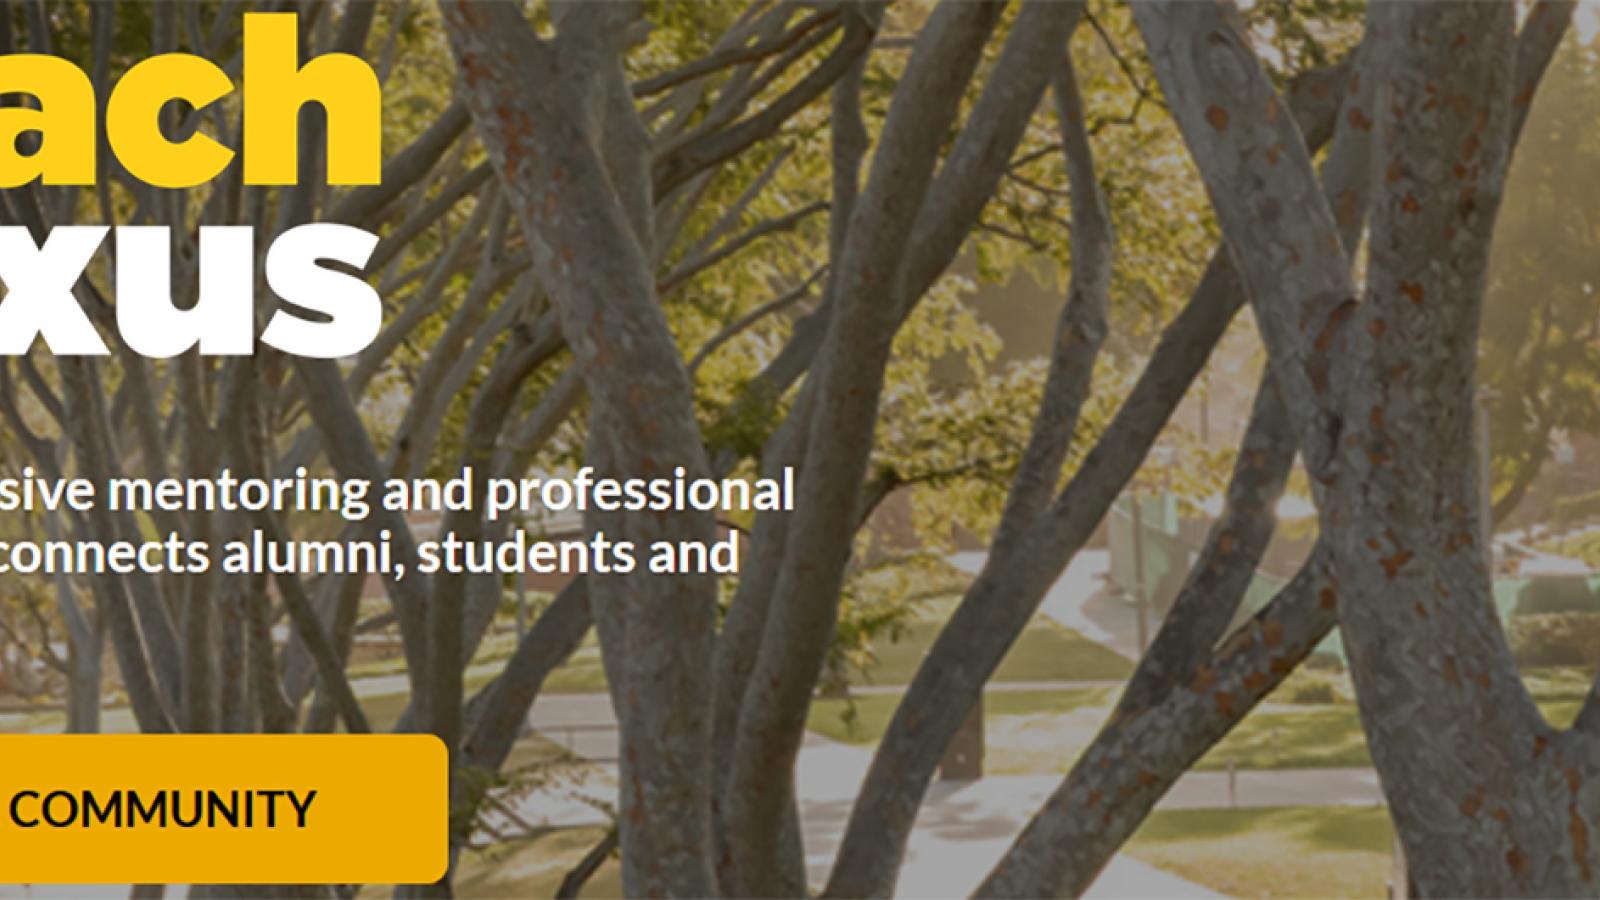 Beach Nexus - CSULB's exclusive mentoring and professional network